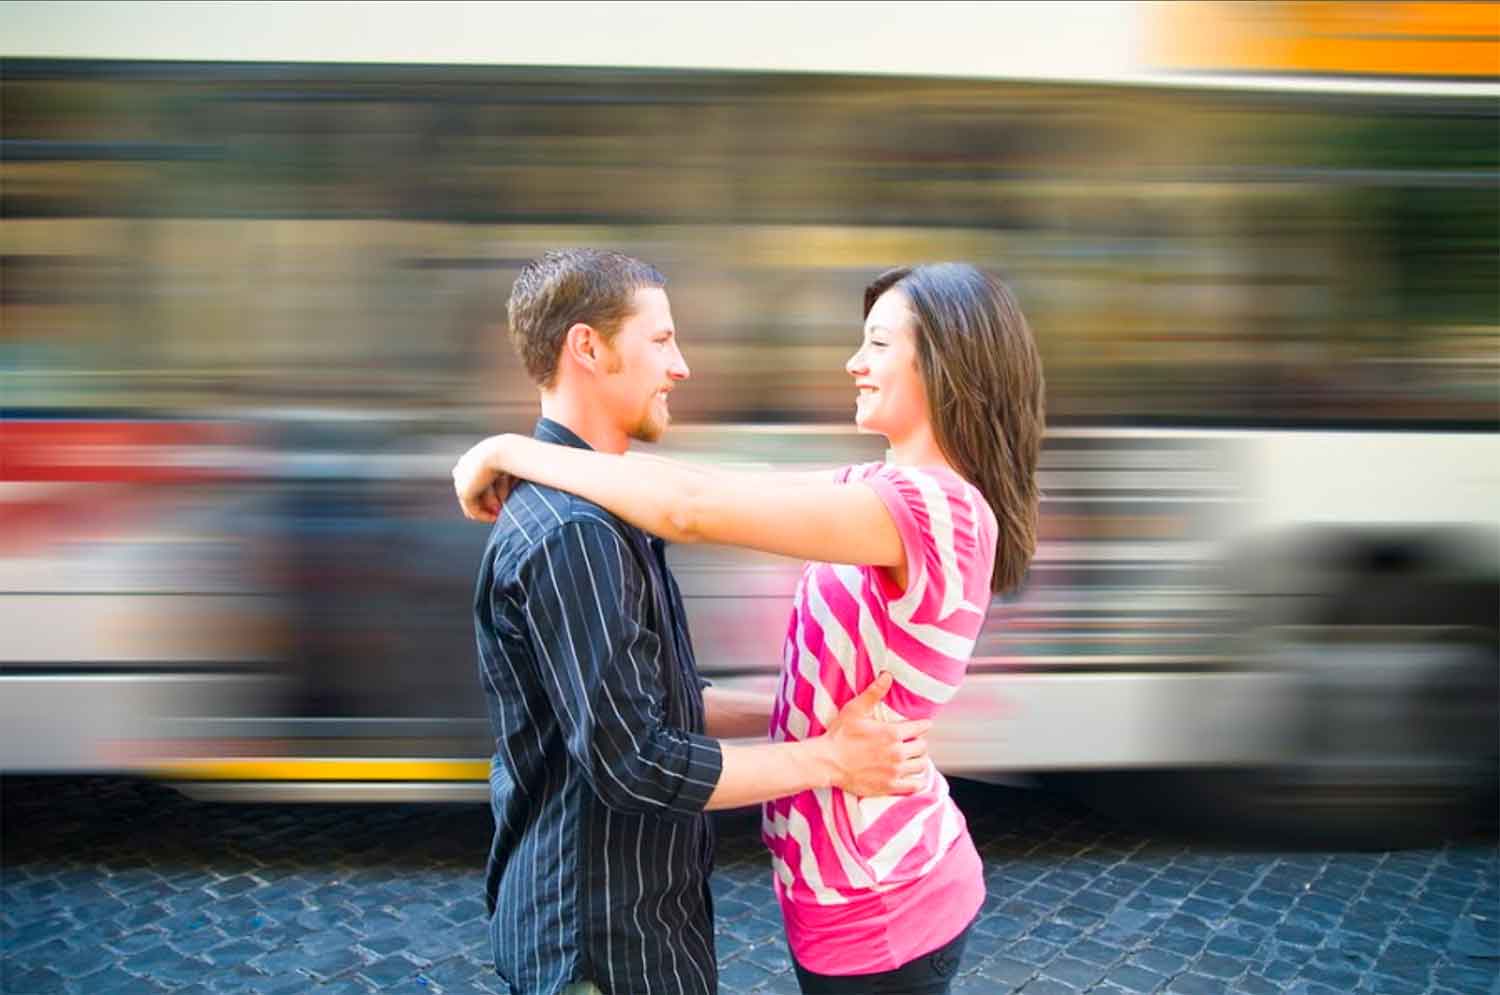 couple photo session in front of passing bus